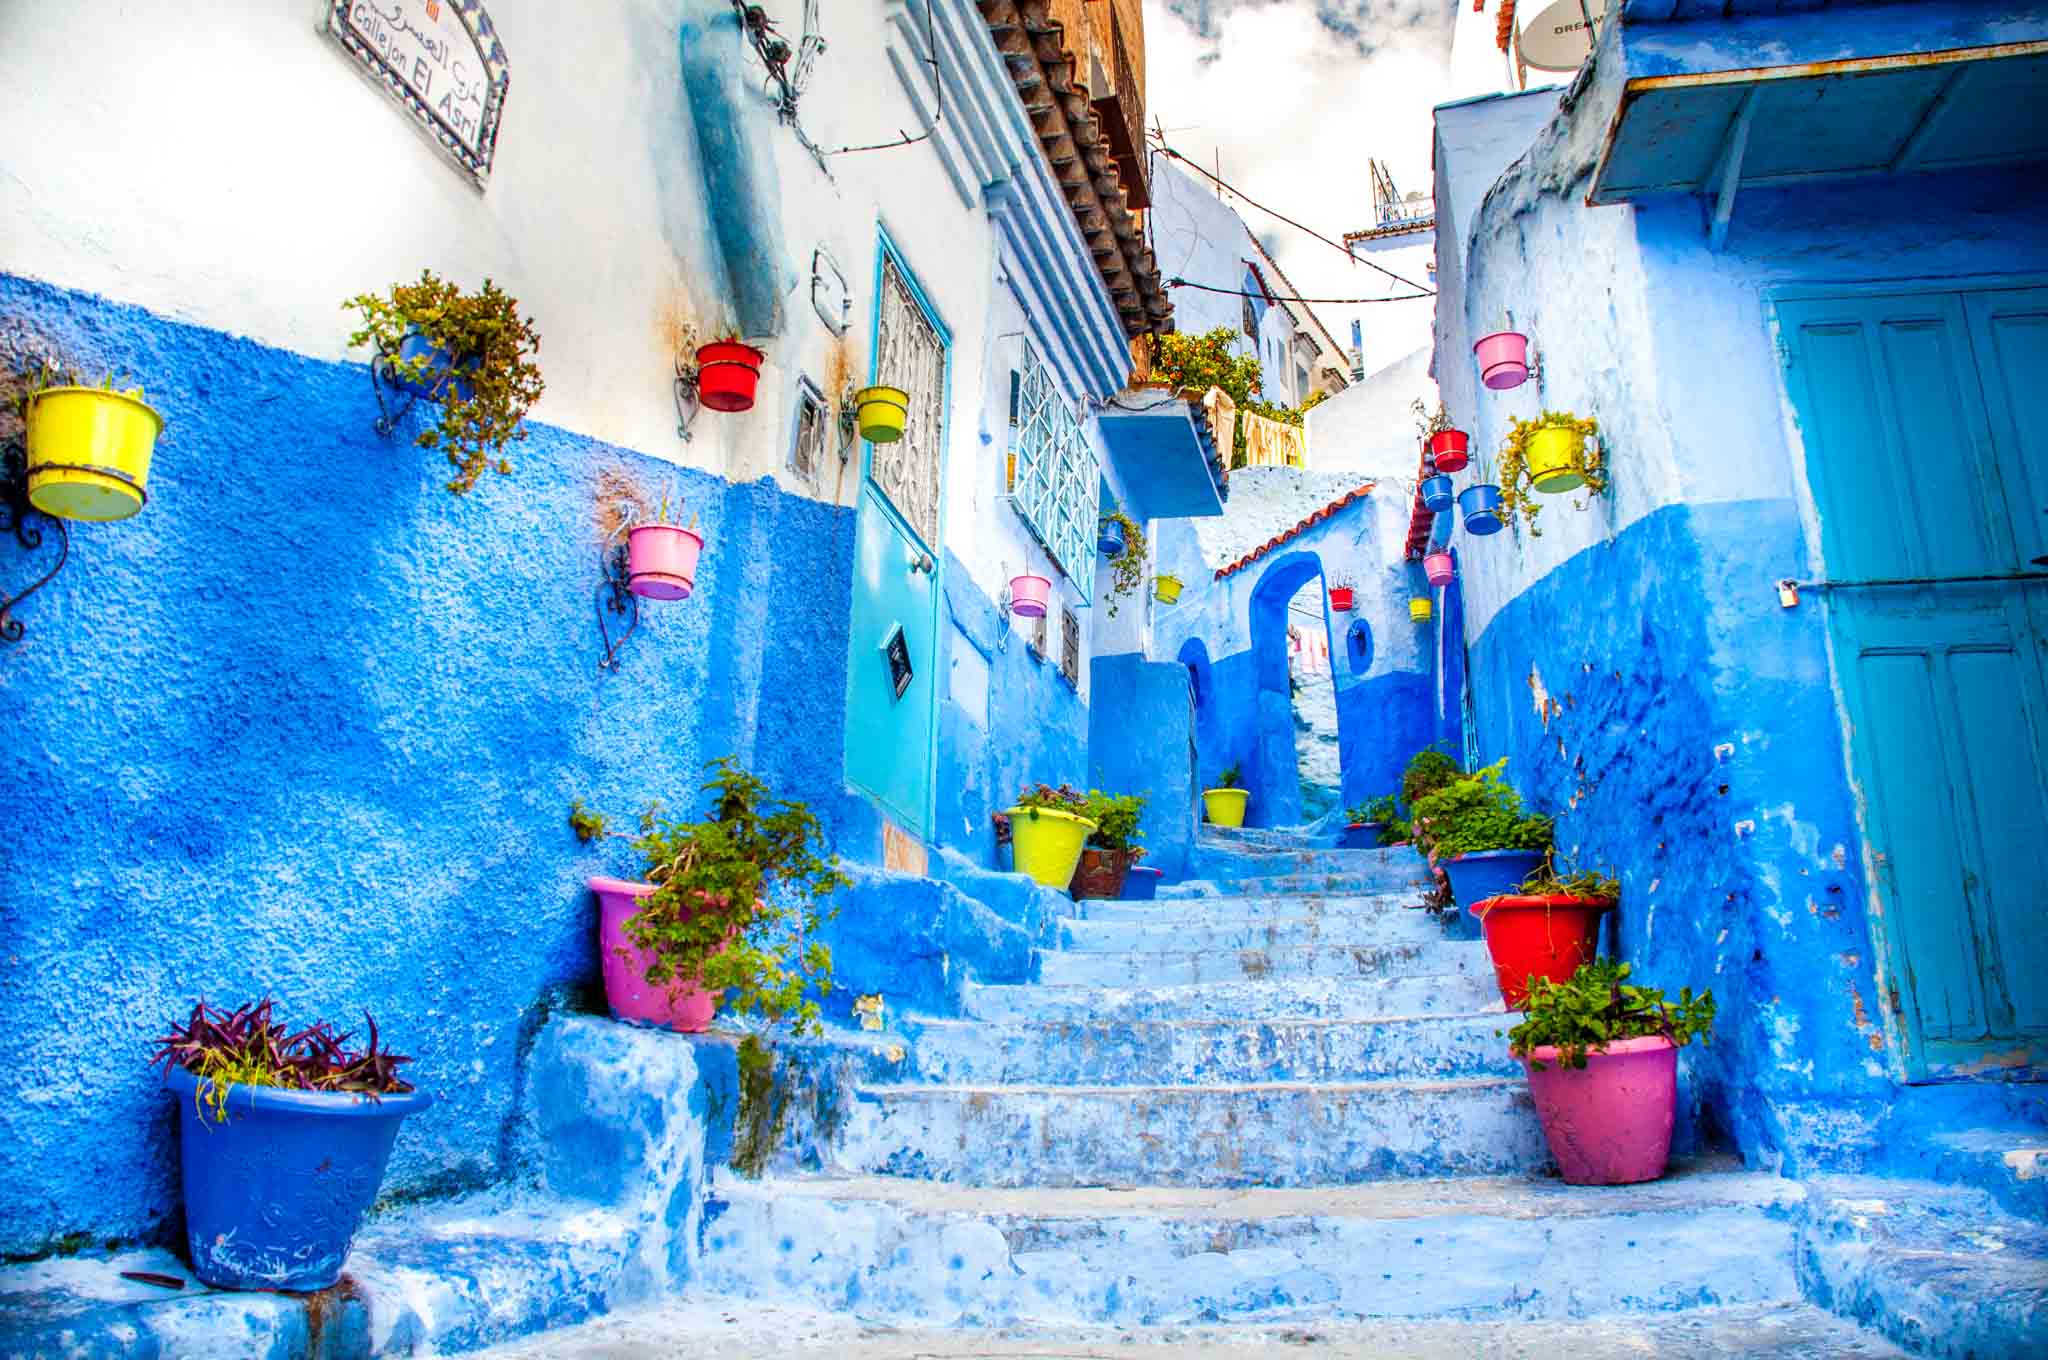 Stepped walkway in the blue city, Chefchaouen